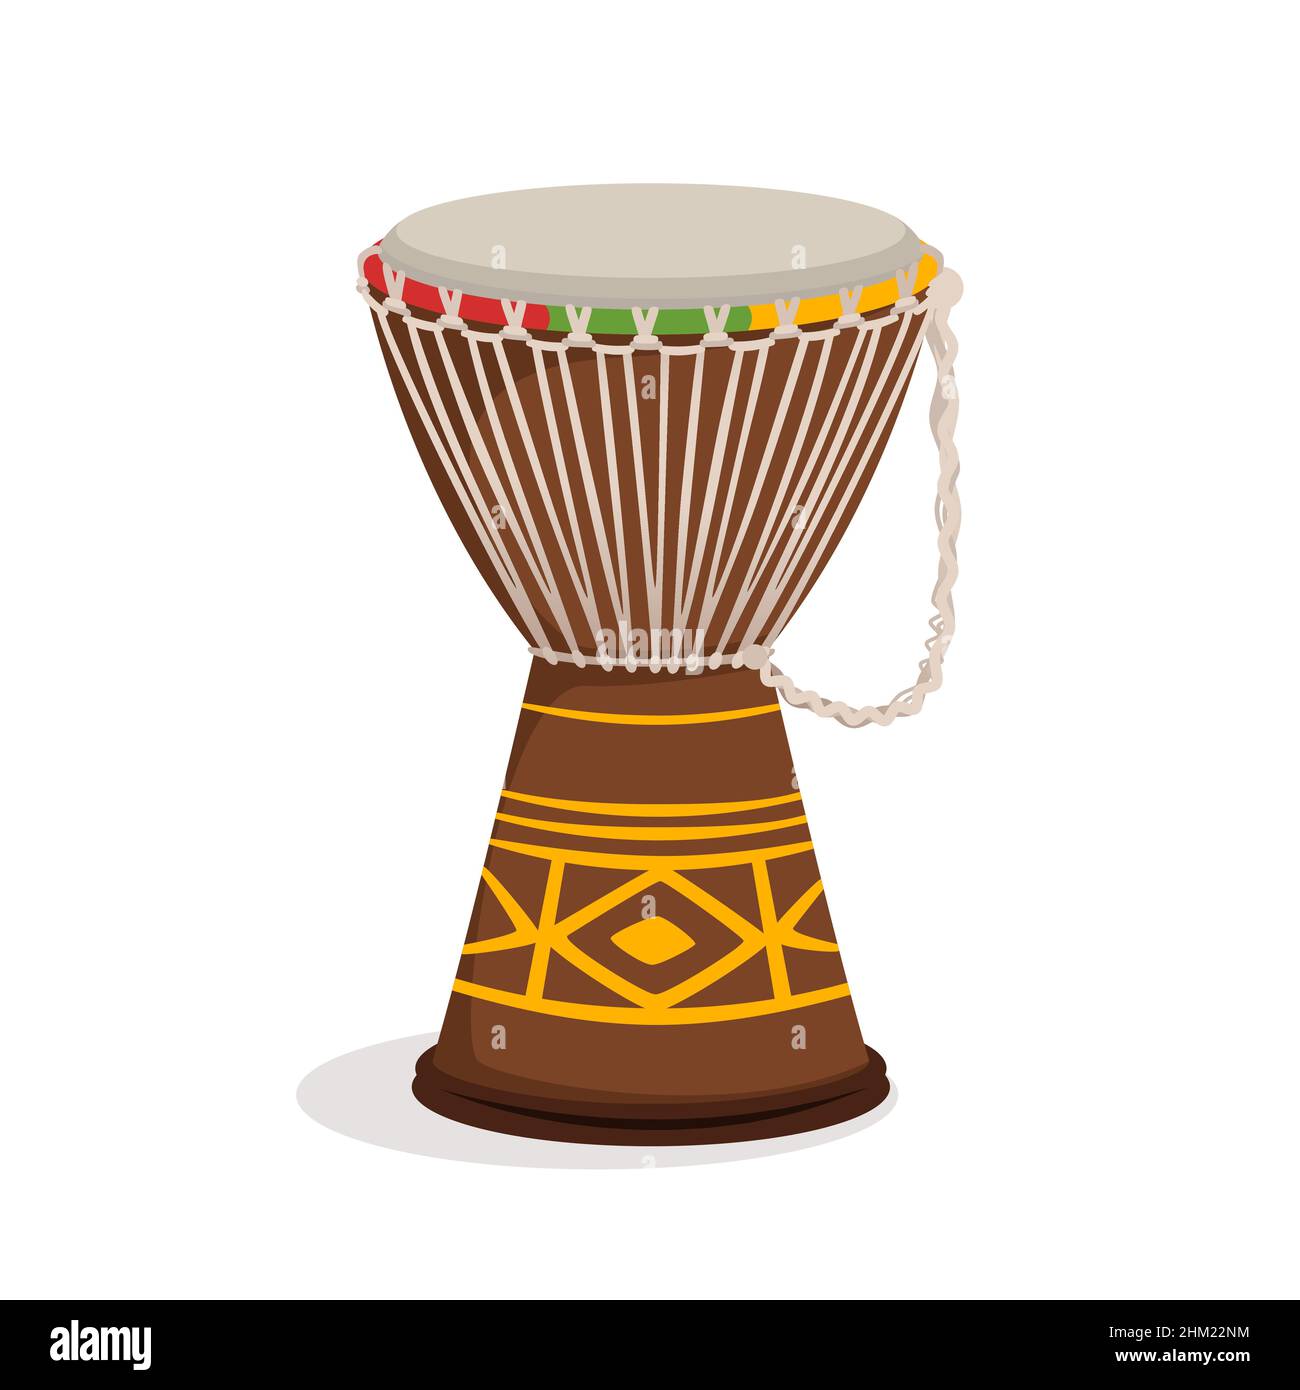 cartoon style illustration of an African drums Stock Vector